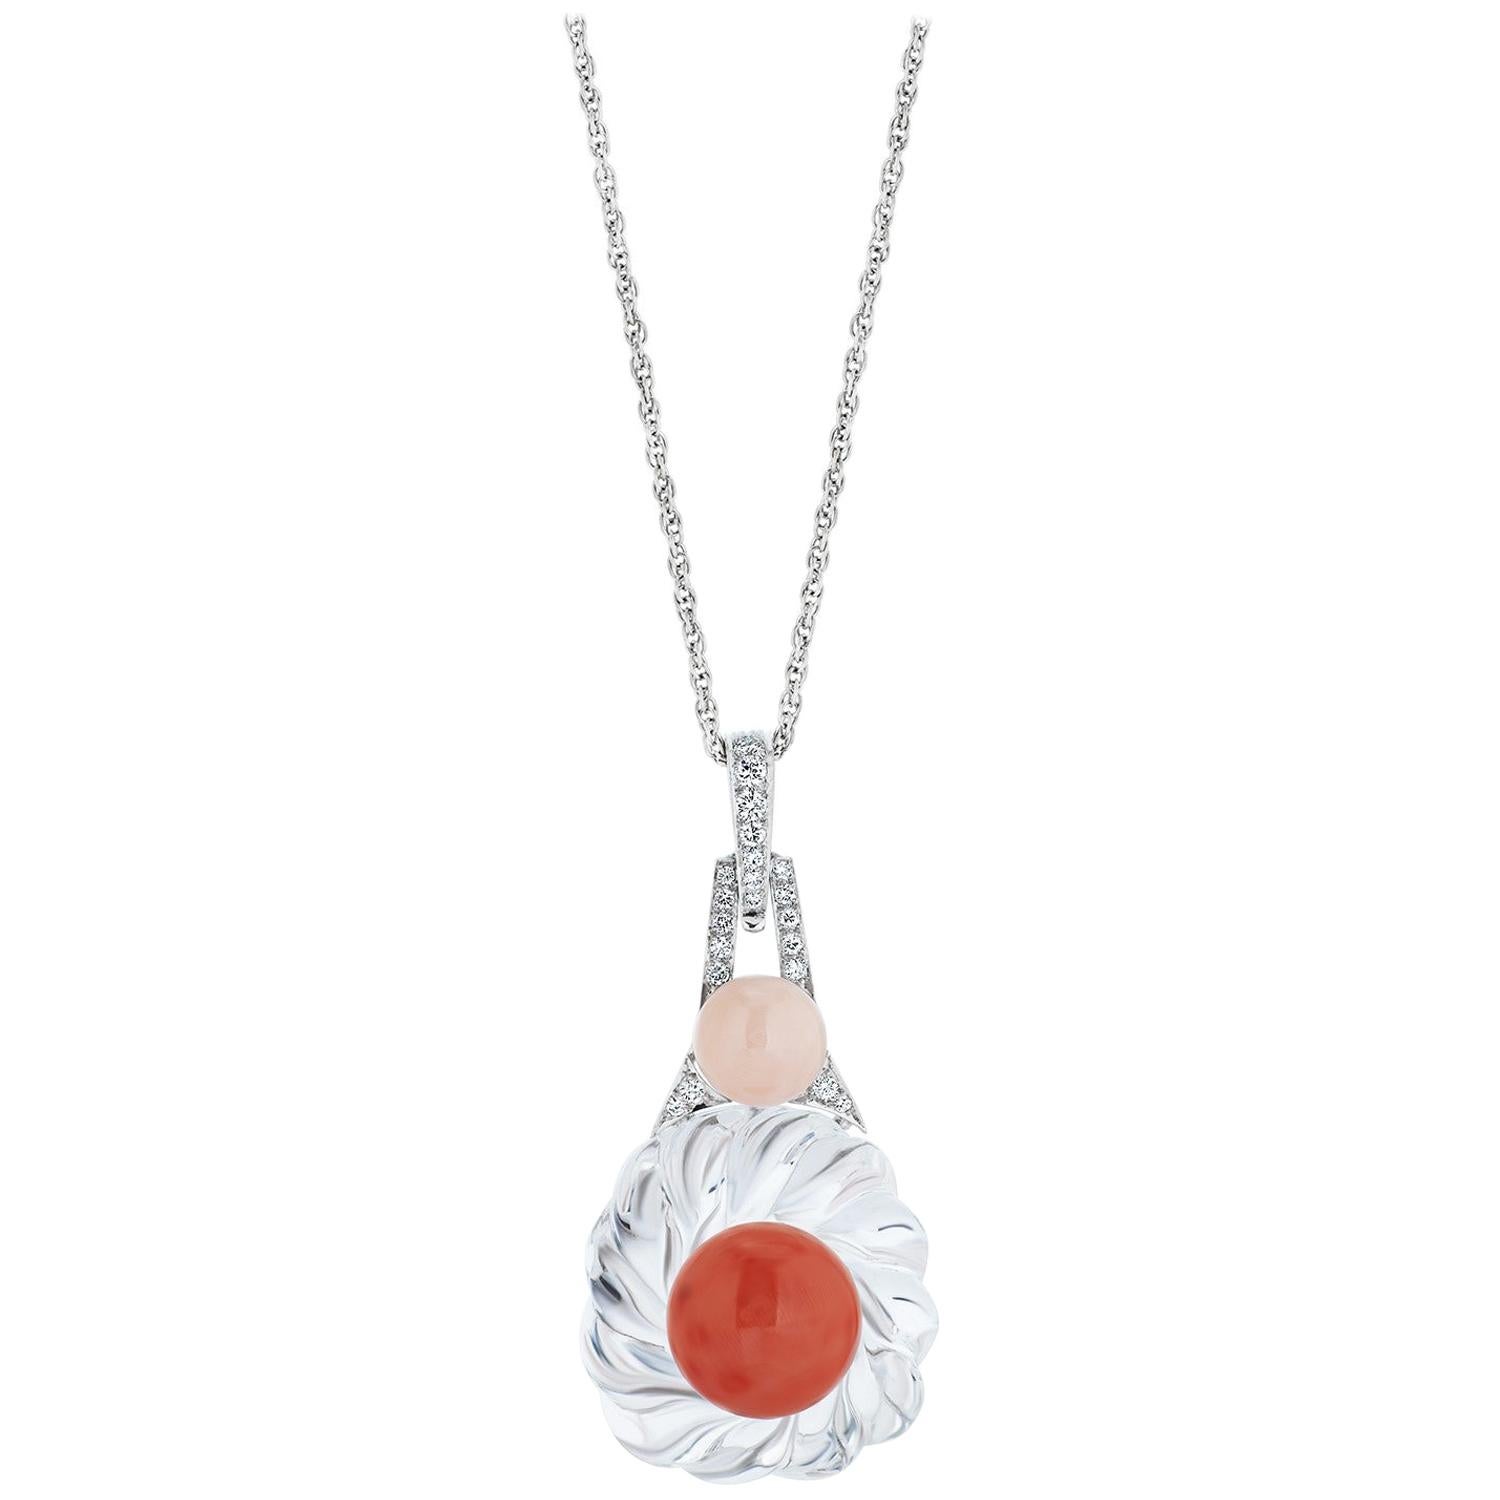 David Webb Rock Crystal, Coral, Angelskin Coral and Diamond Pendant Necklace For Sale